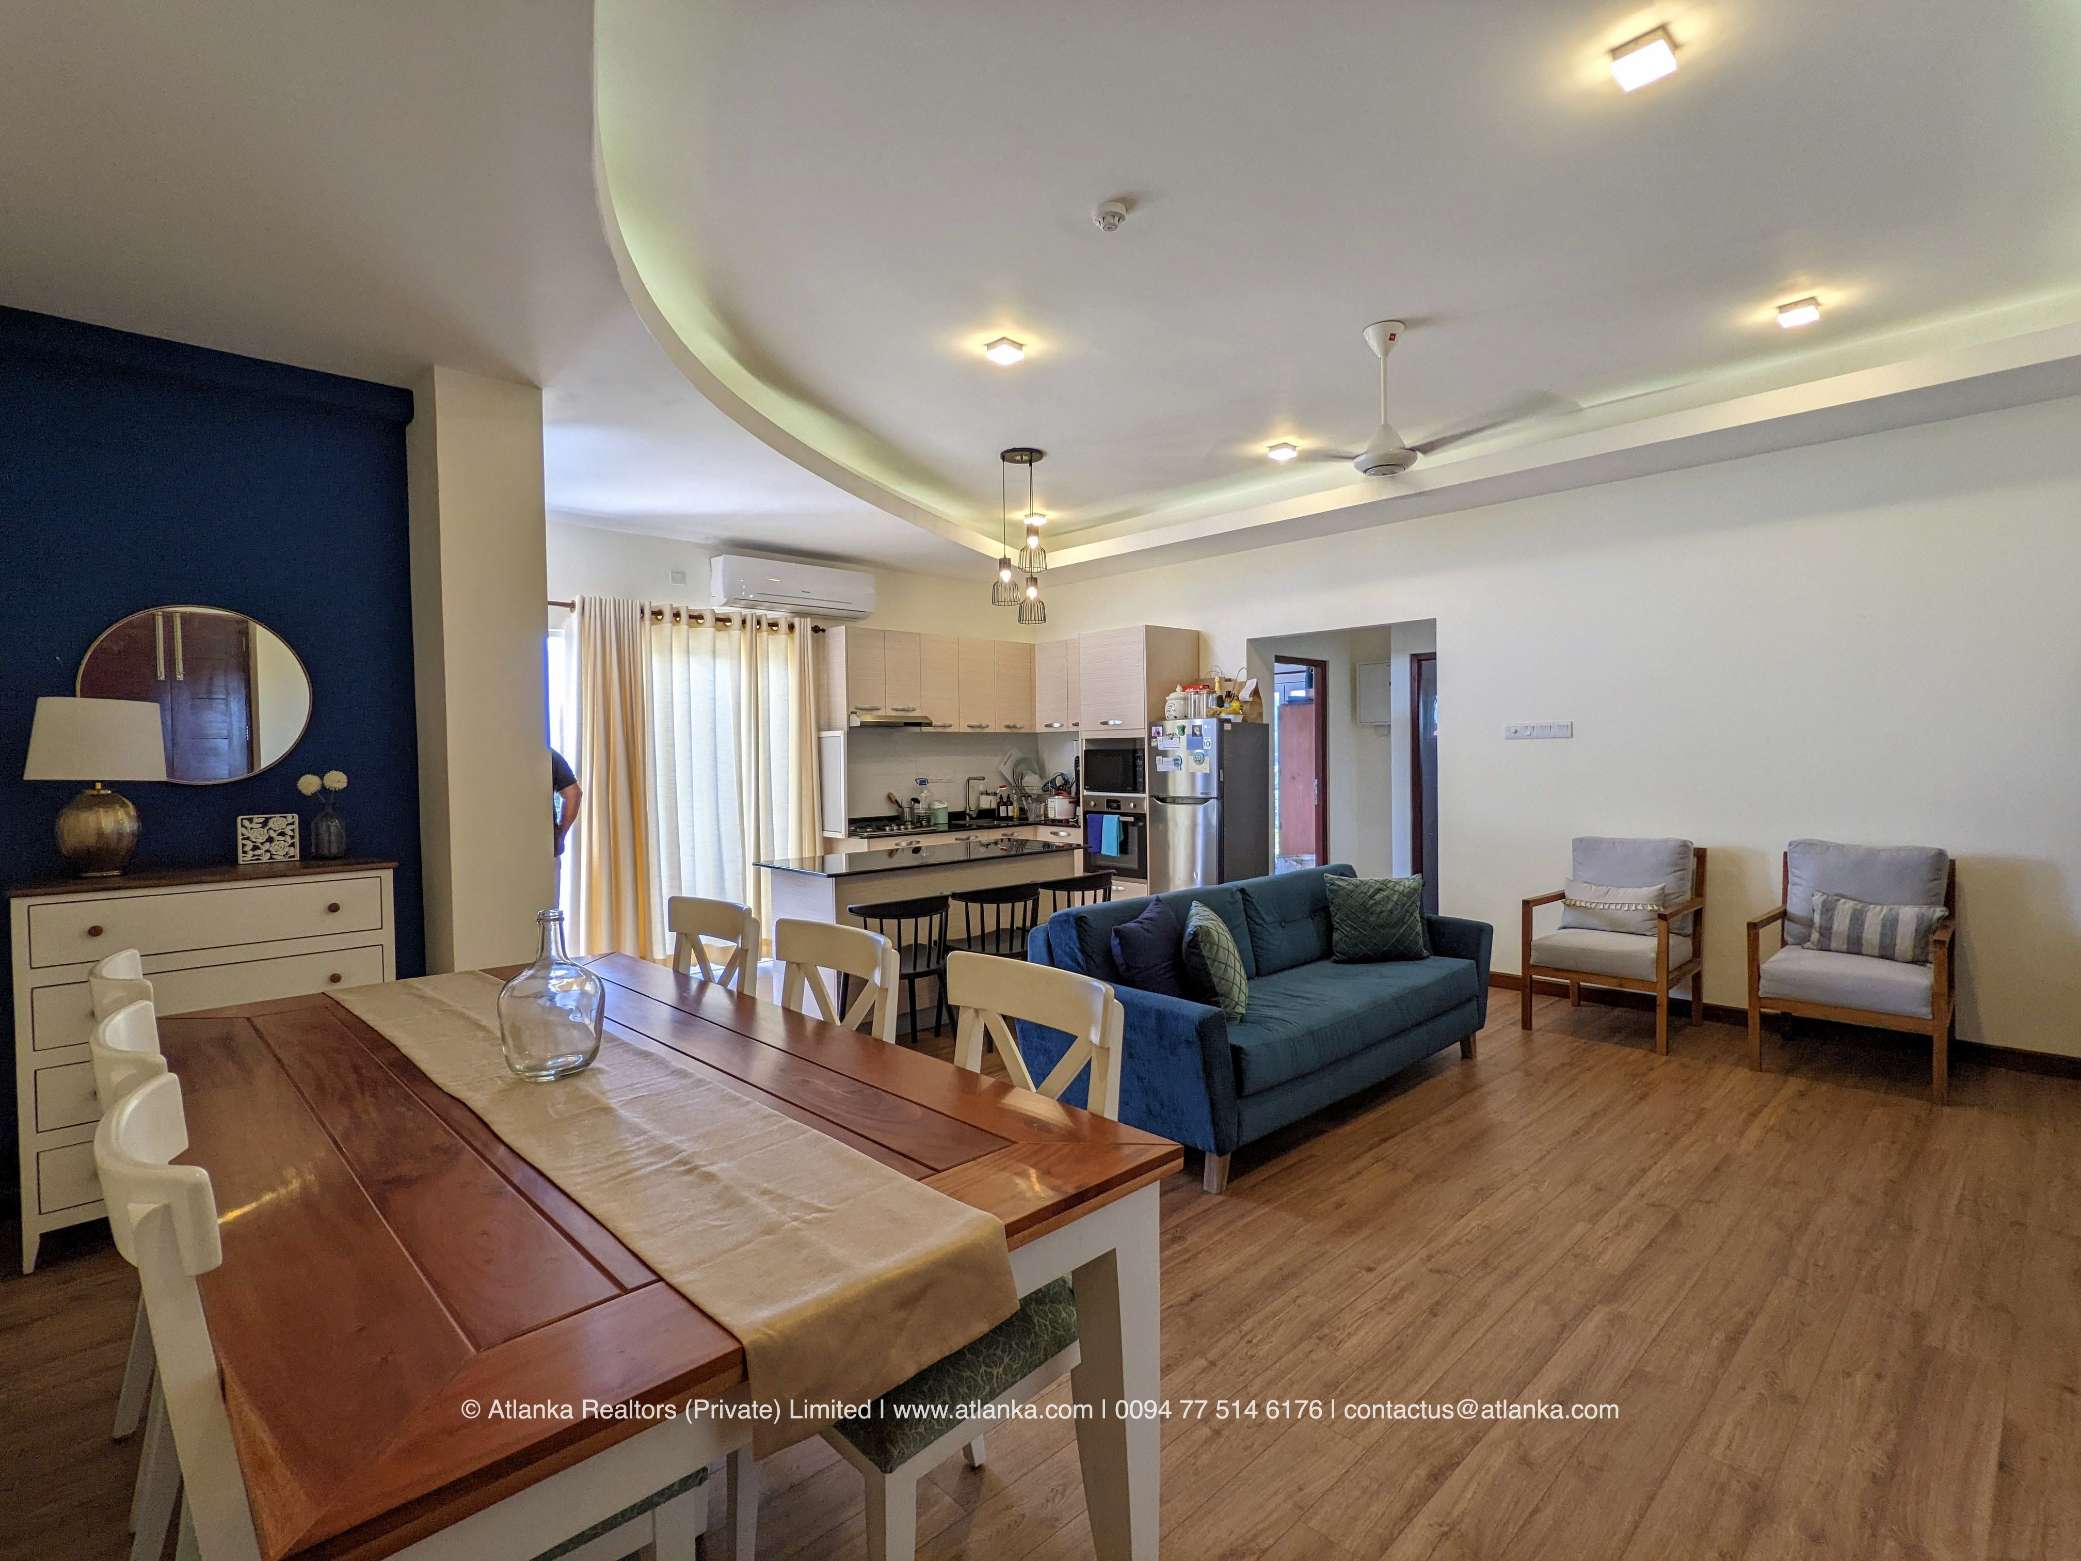 Apartment for Sale in Ethul Kotte